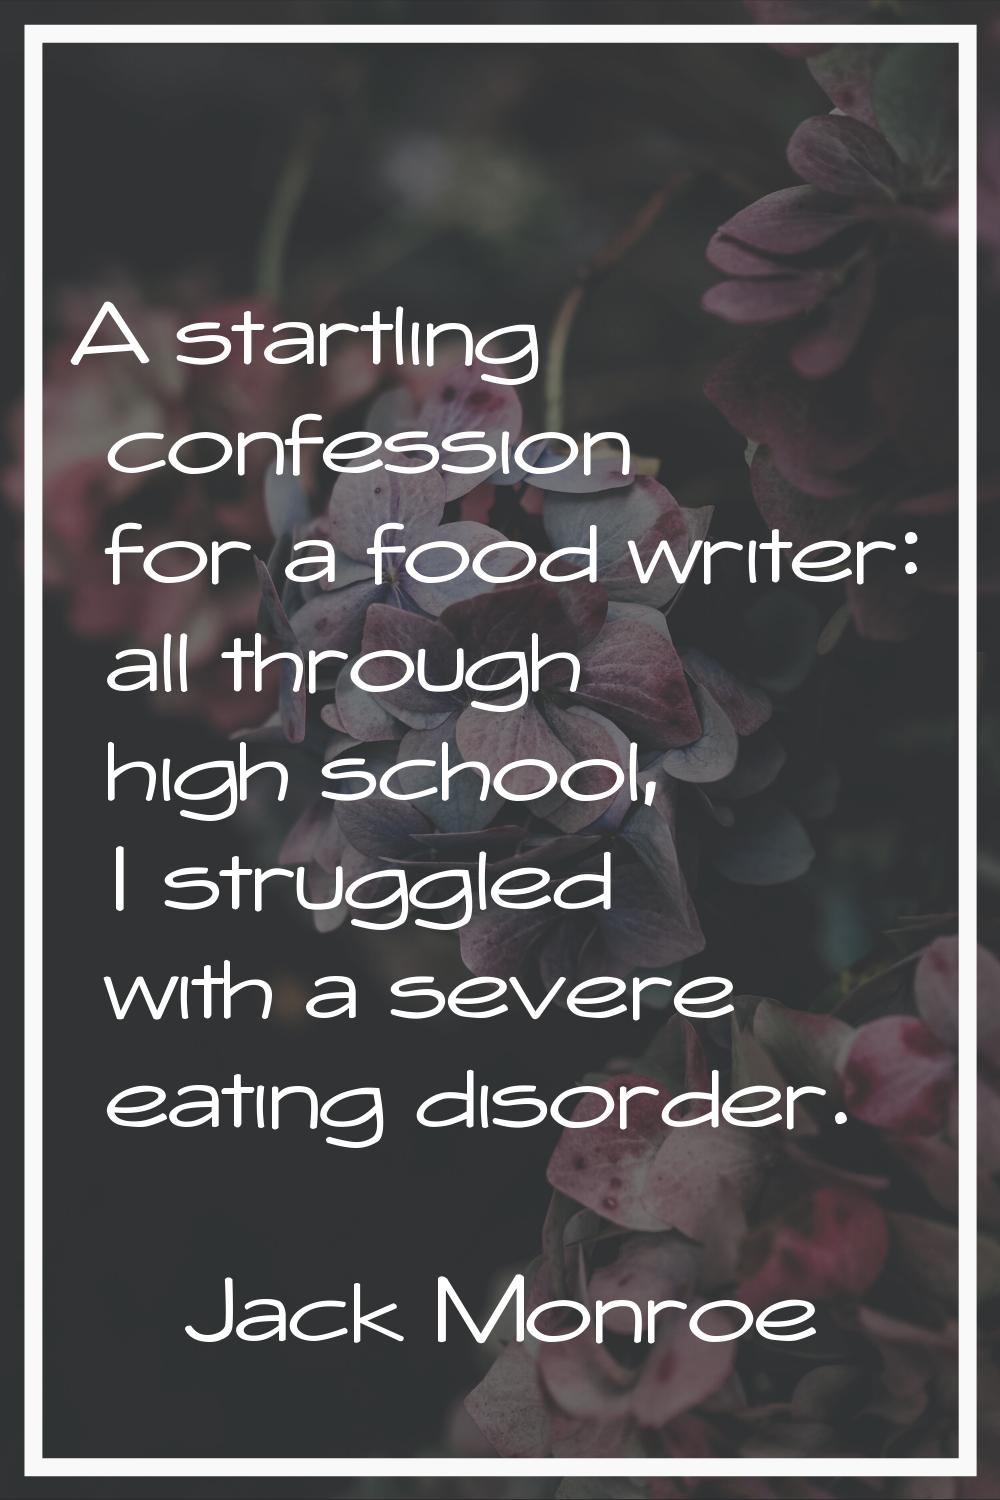 A startling confession for a food writer: all through high school, I struggled with a severe eating